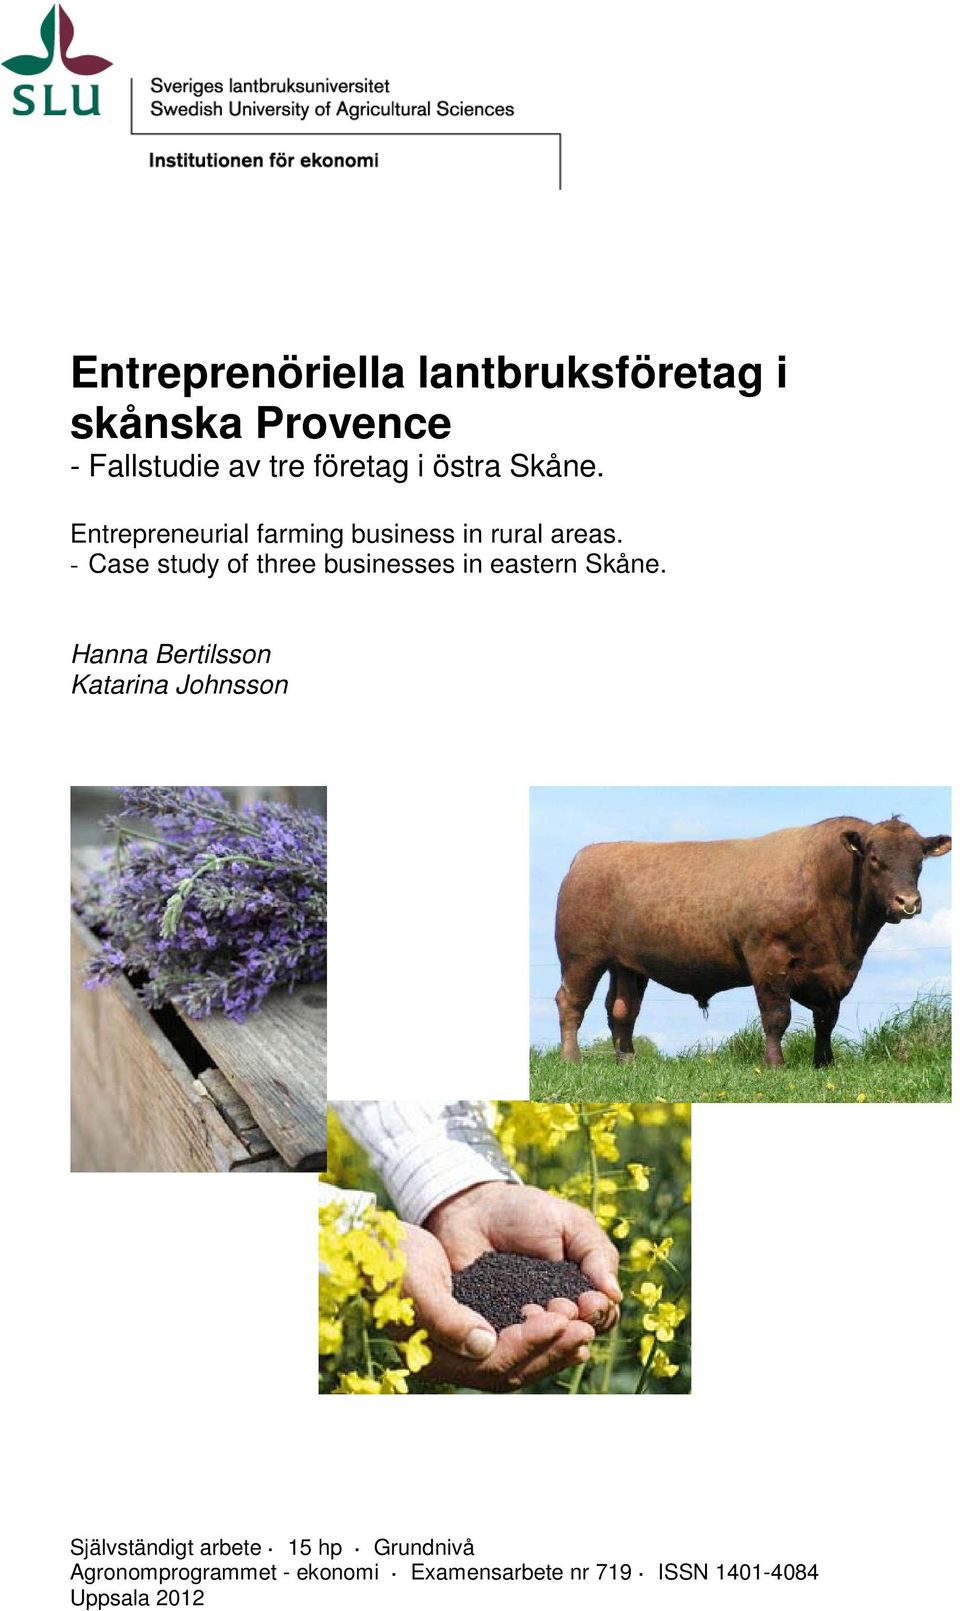 - Case study of three businesses in eastern Skåne.